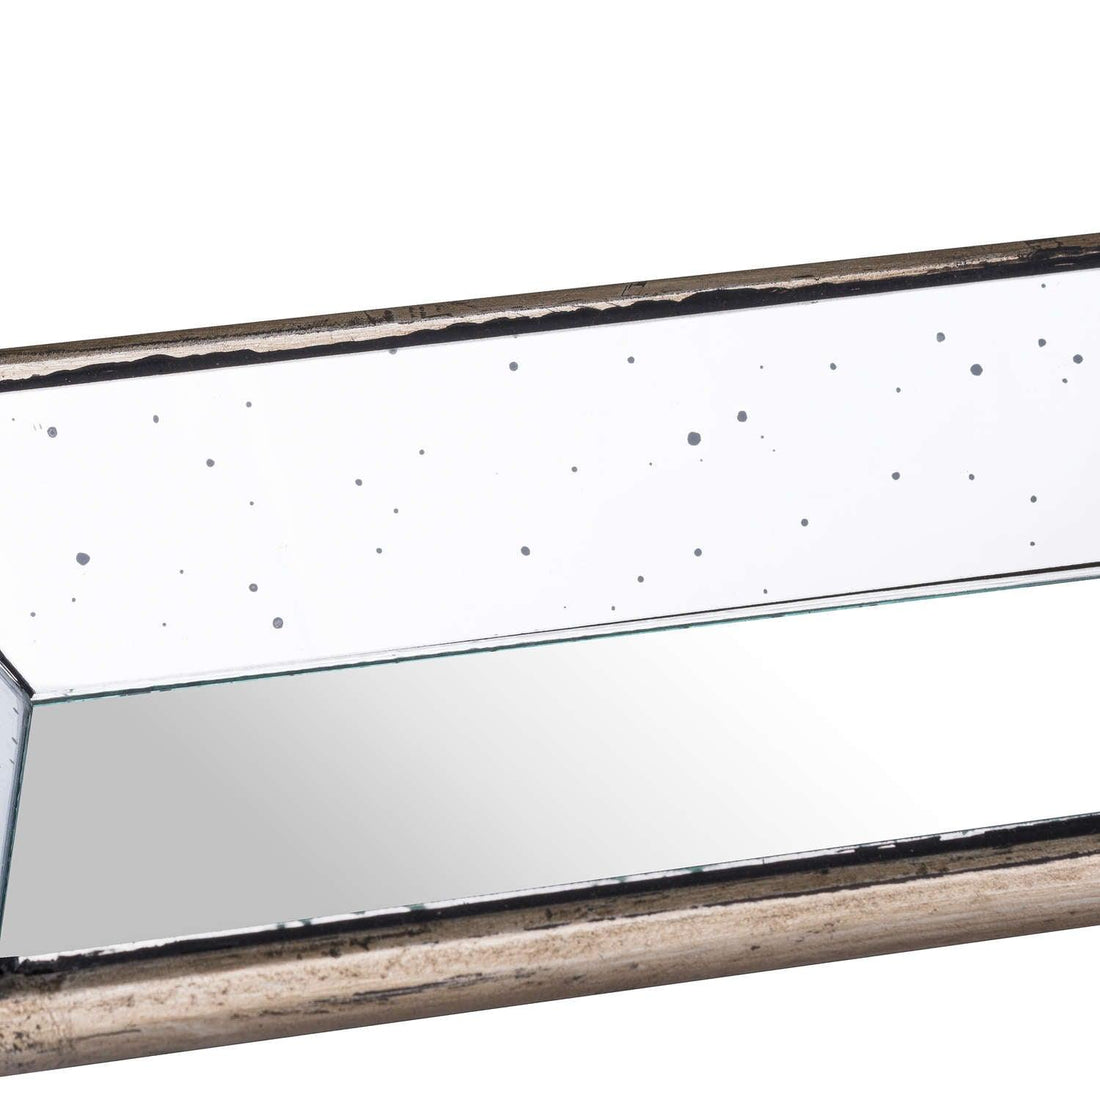 Astor Distressed Mirrored Display Tray With Wooden Detailing - £44.95 - Gifts & Accessories > Trays 